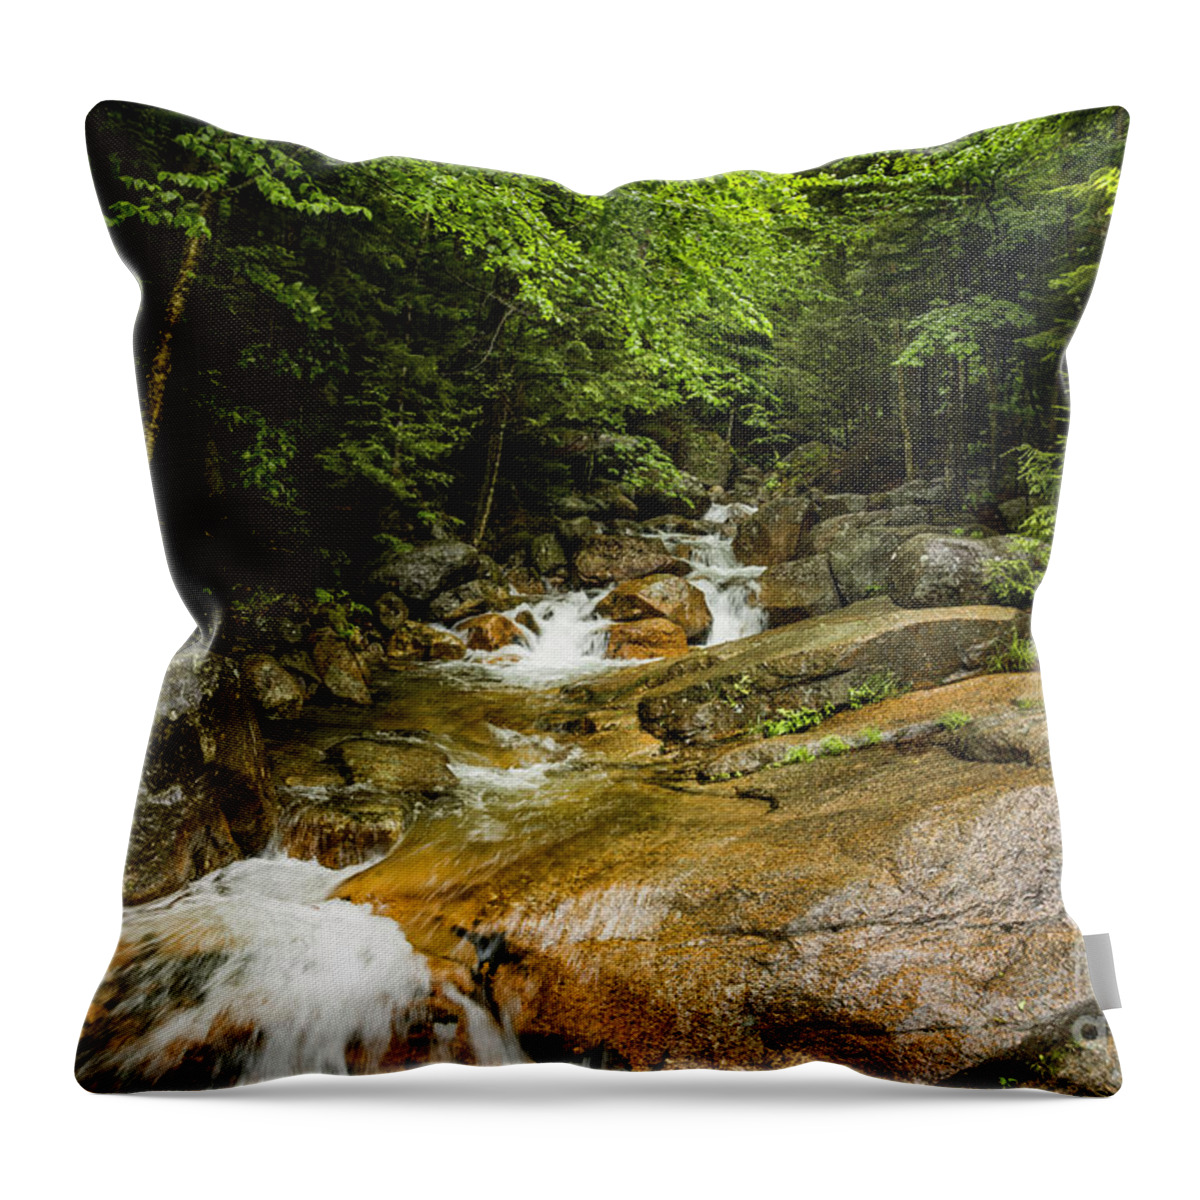 Flowing Throw Pillow featuring the photograph Flume Stream by Alana Ranney